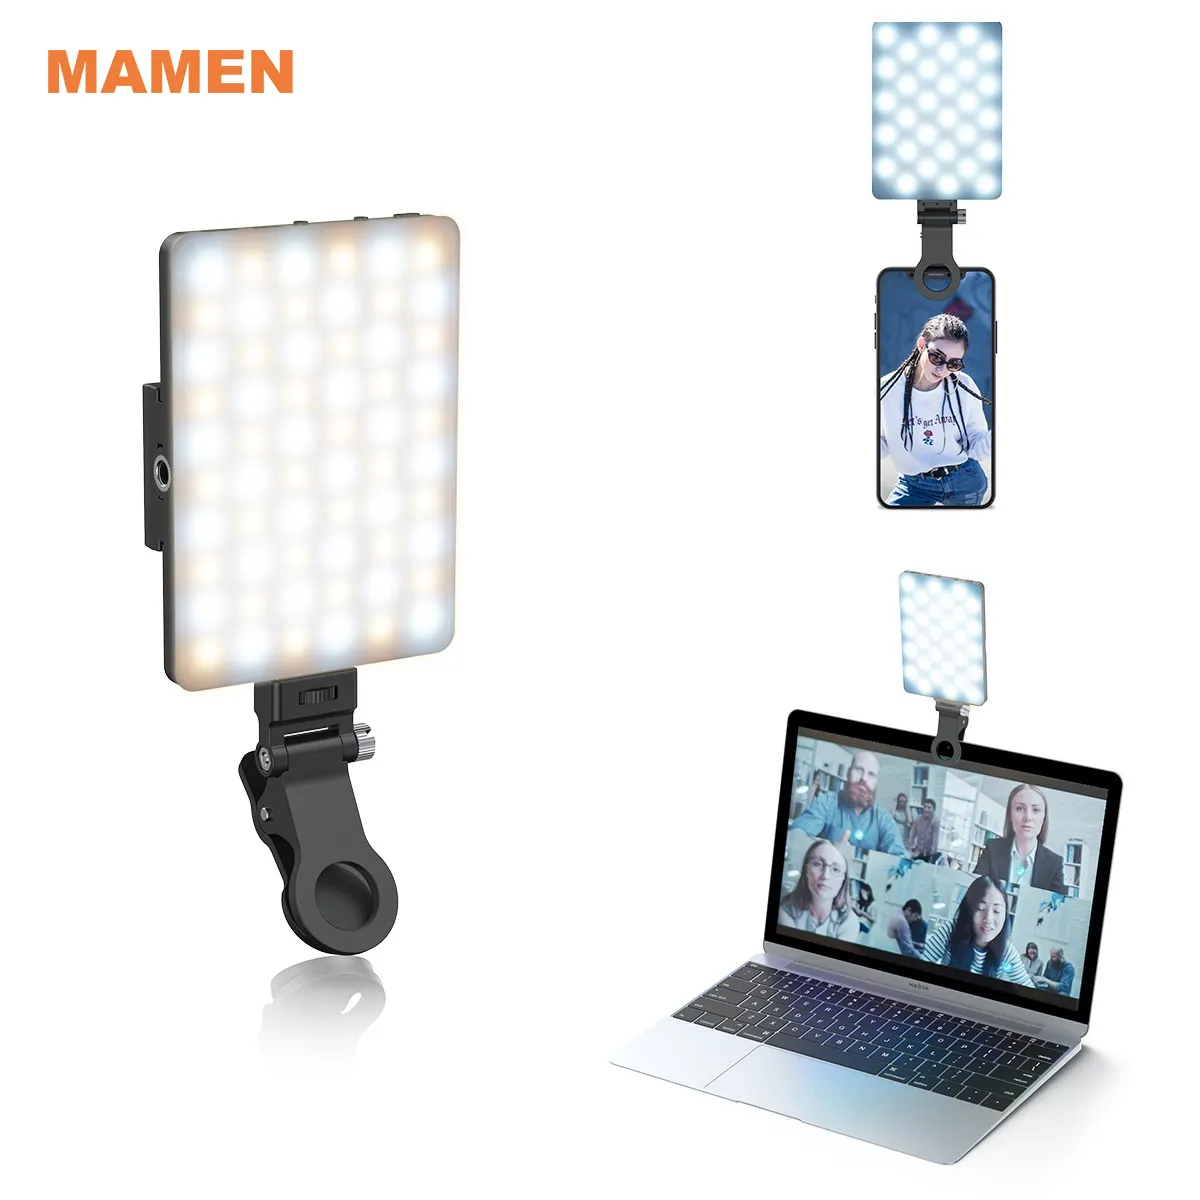 Oplaadbare Smartphone Clip Led Vul Licht Draagbare Led Live Streaming Make-Up Webcam Verlichting Zoom Call Clip Licht